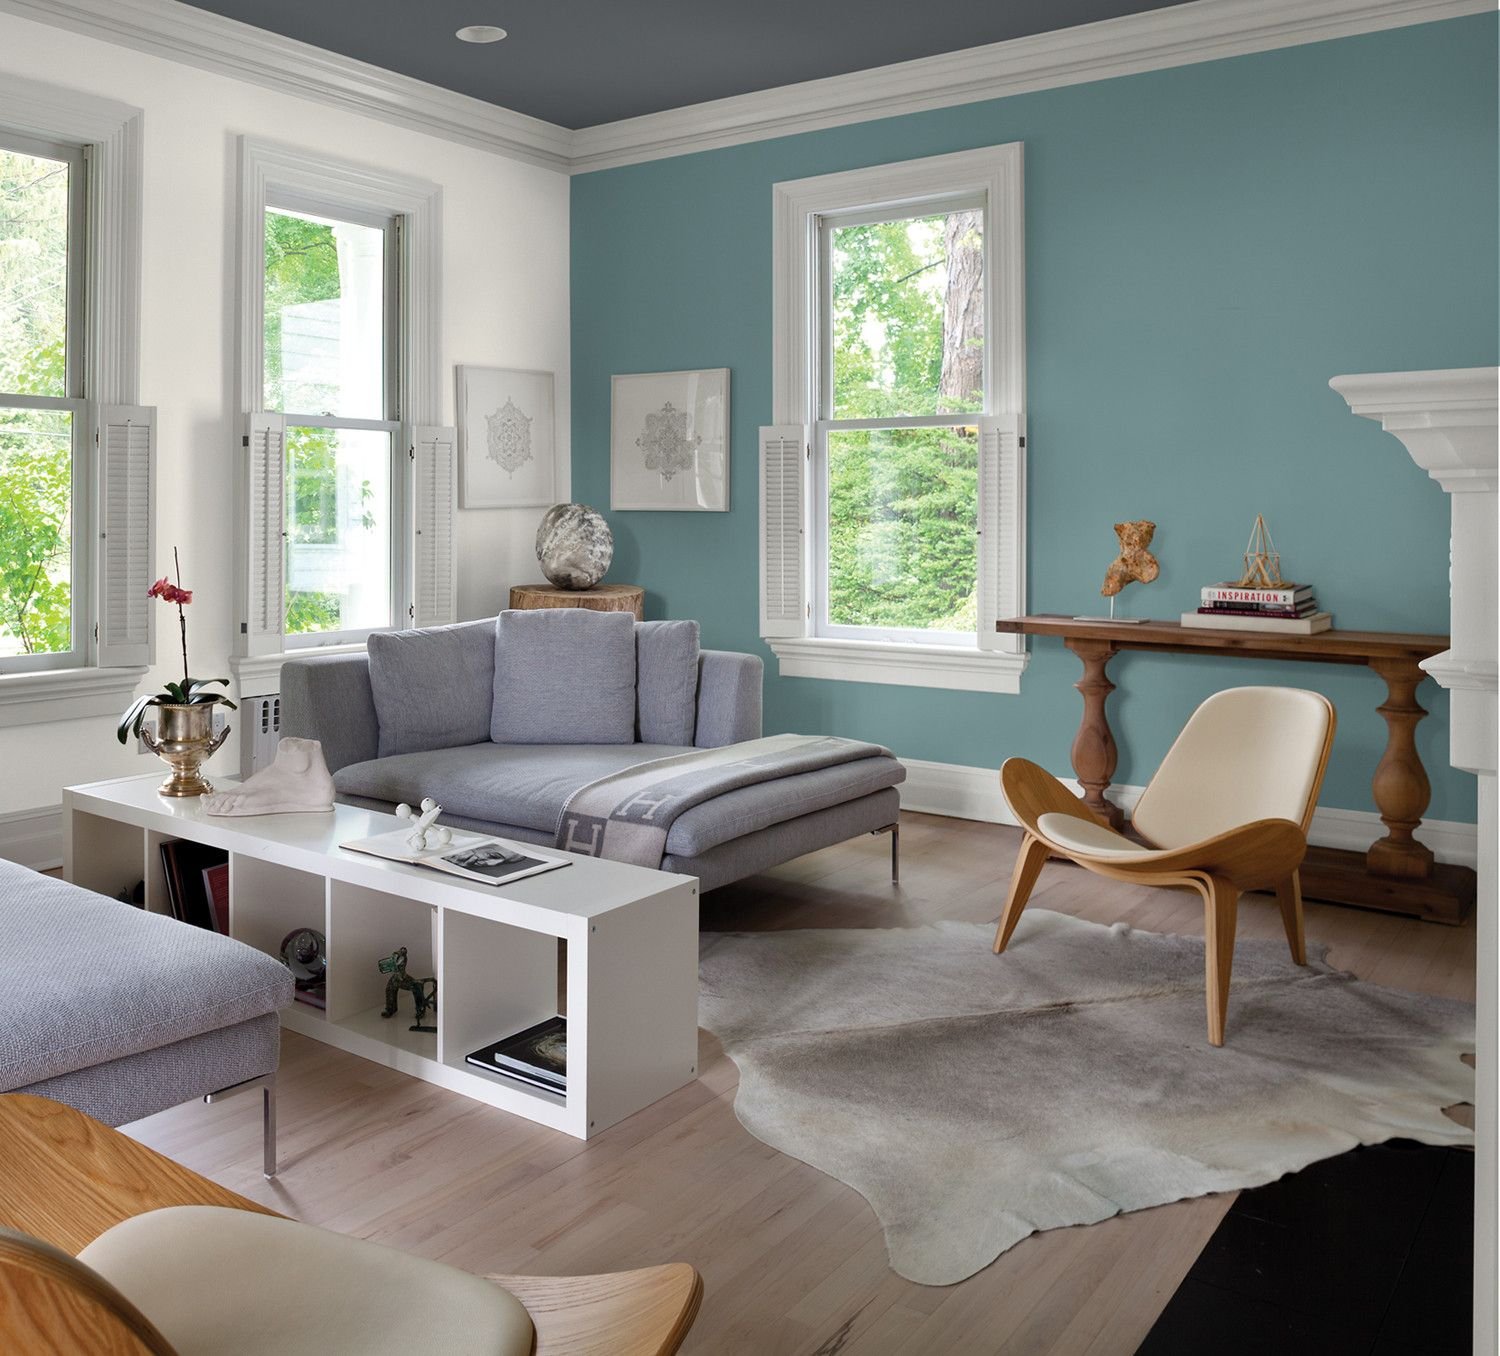 What Are The Most Modern Living Room Paint Colors? - Home Decoration & More